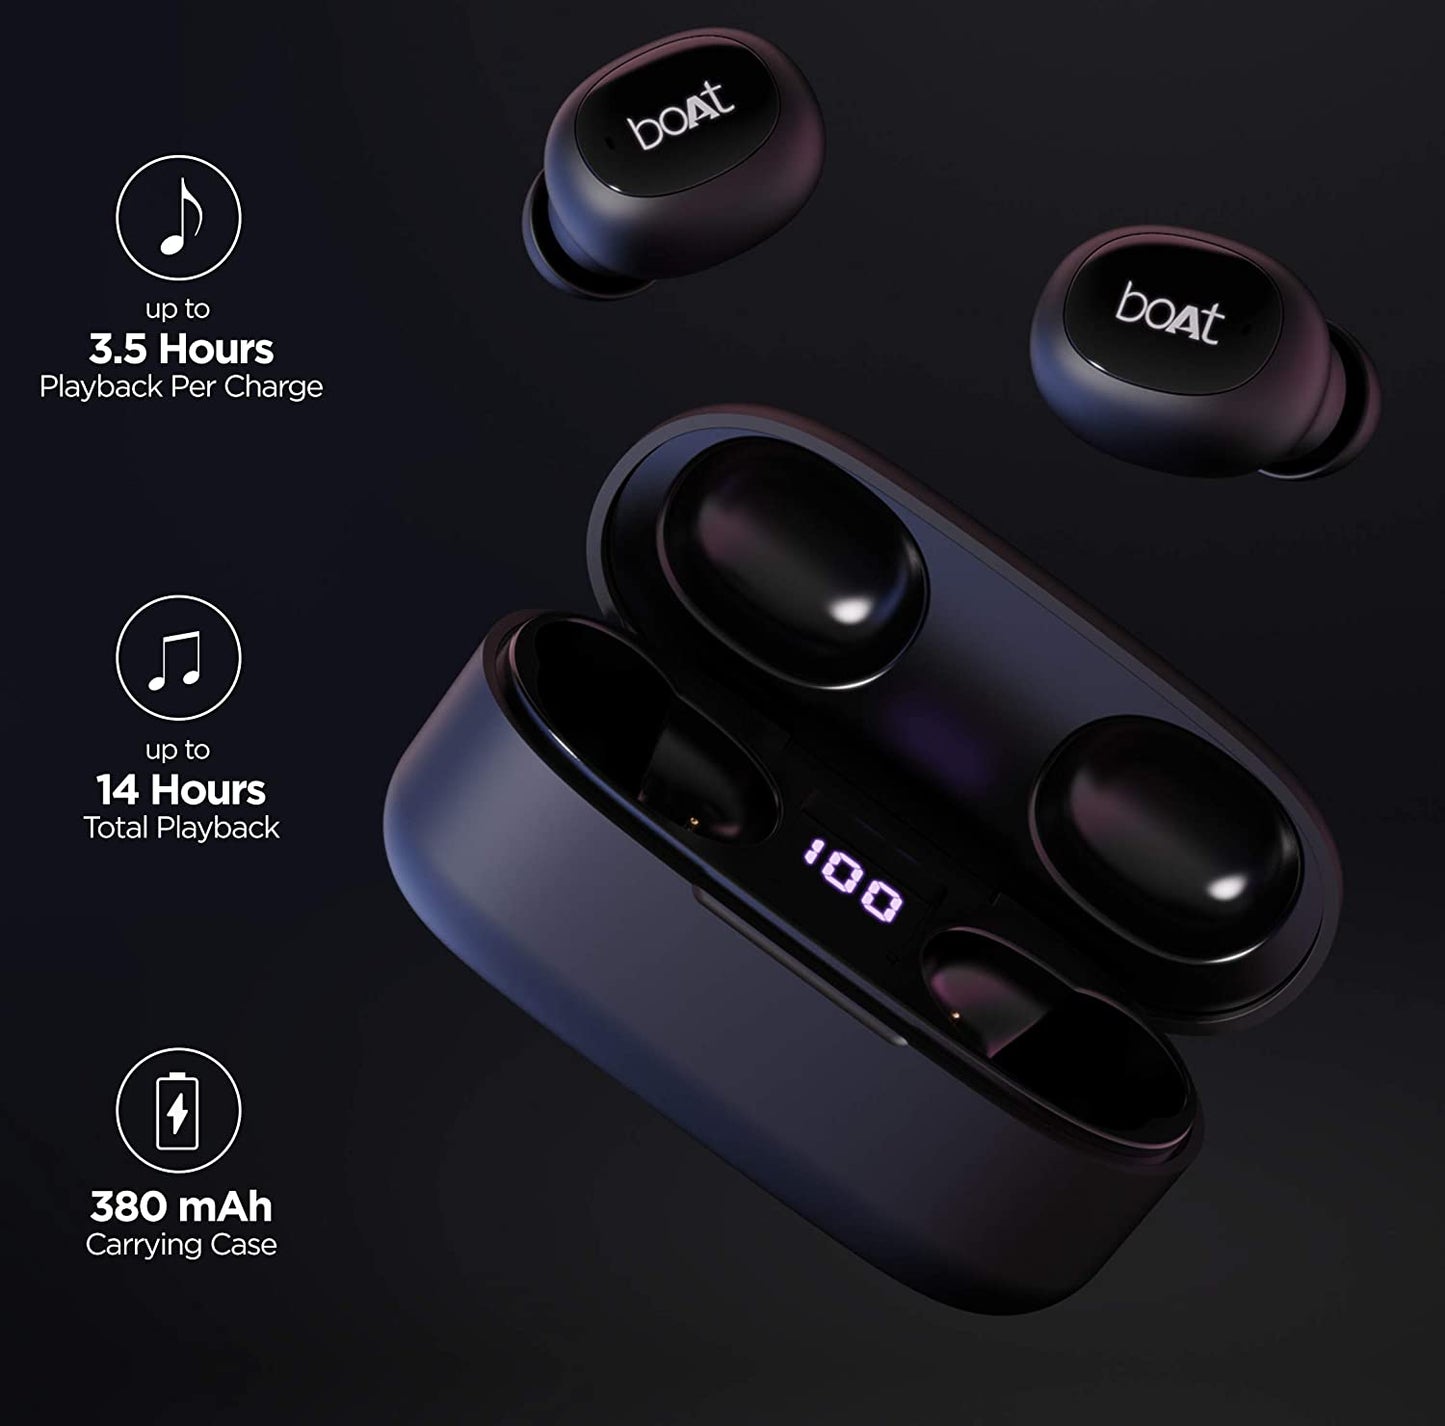 (Without Box) Boat Airdopes 121V2 Bluetooth Truly Wireless in Ear Earbuds with Upto 14 Hours Playback, Lightweight Earbuds with Mic, Active Black